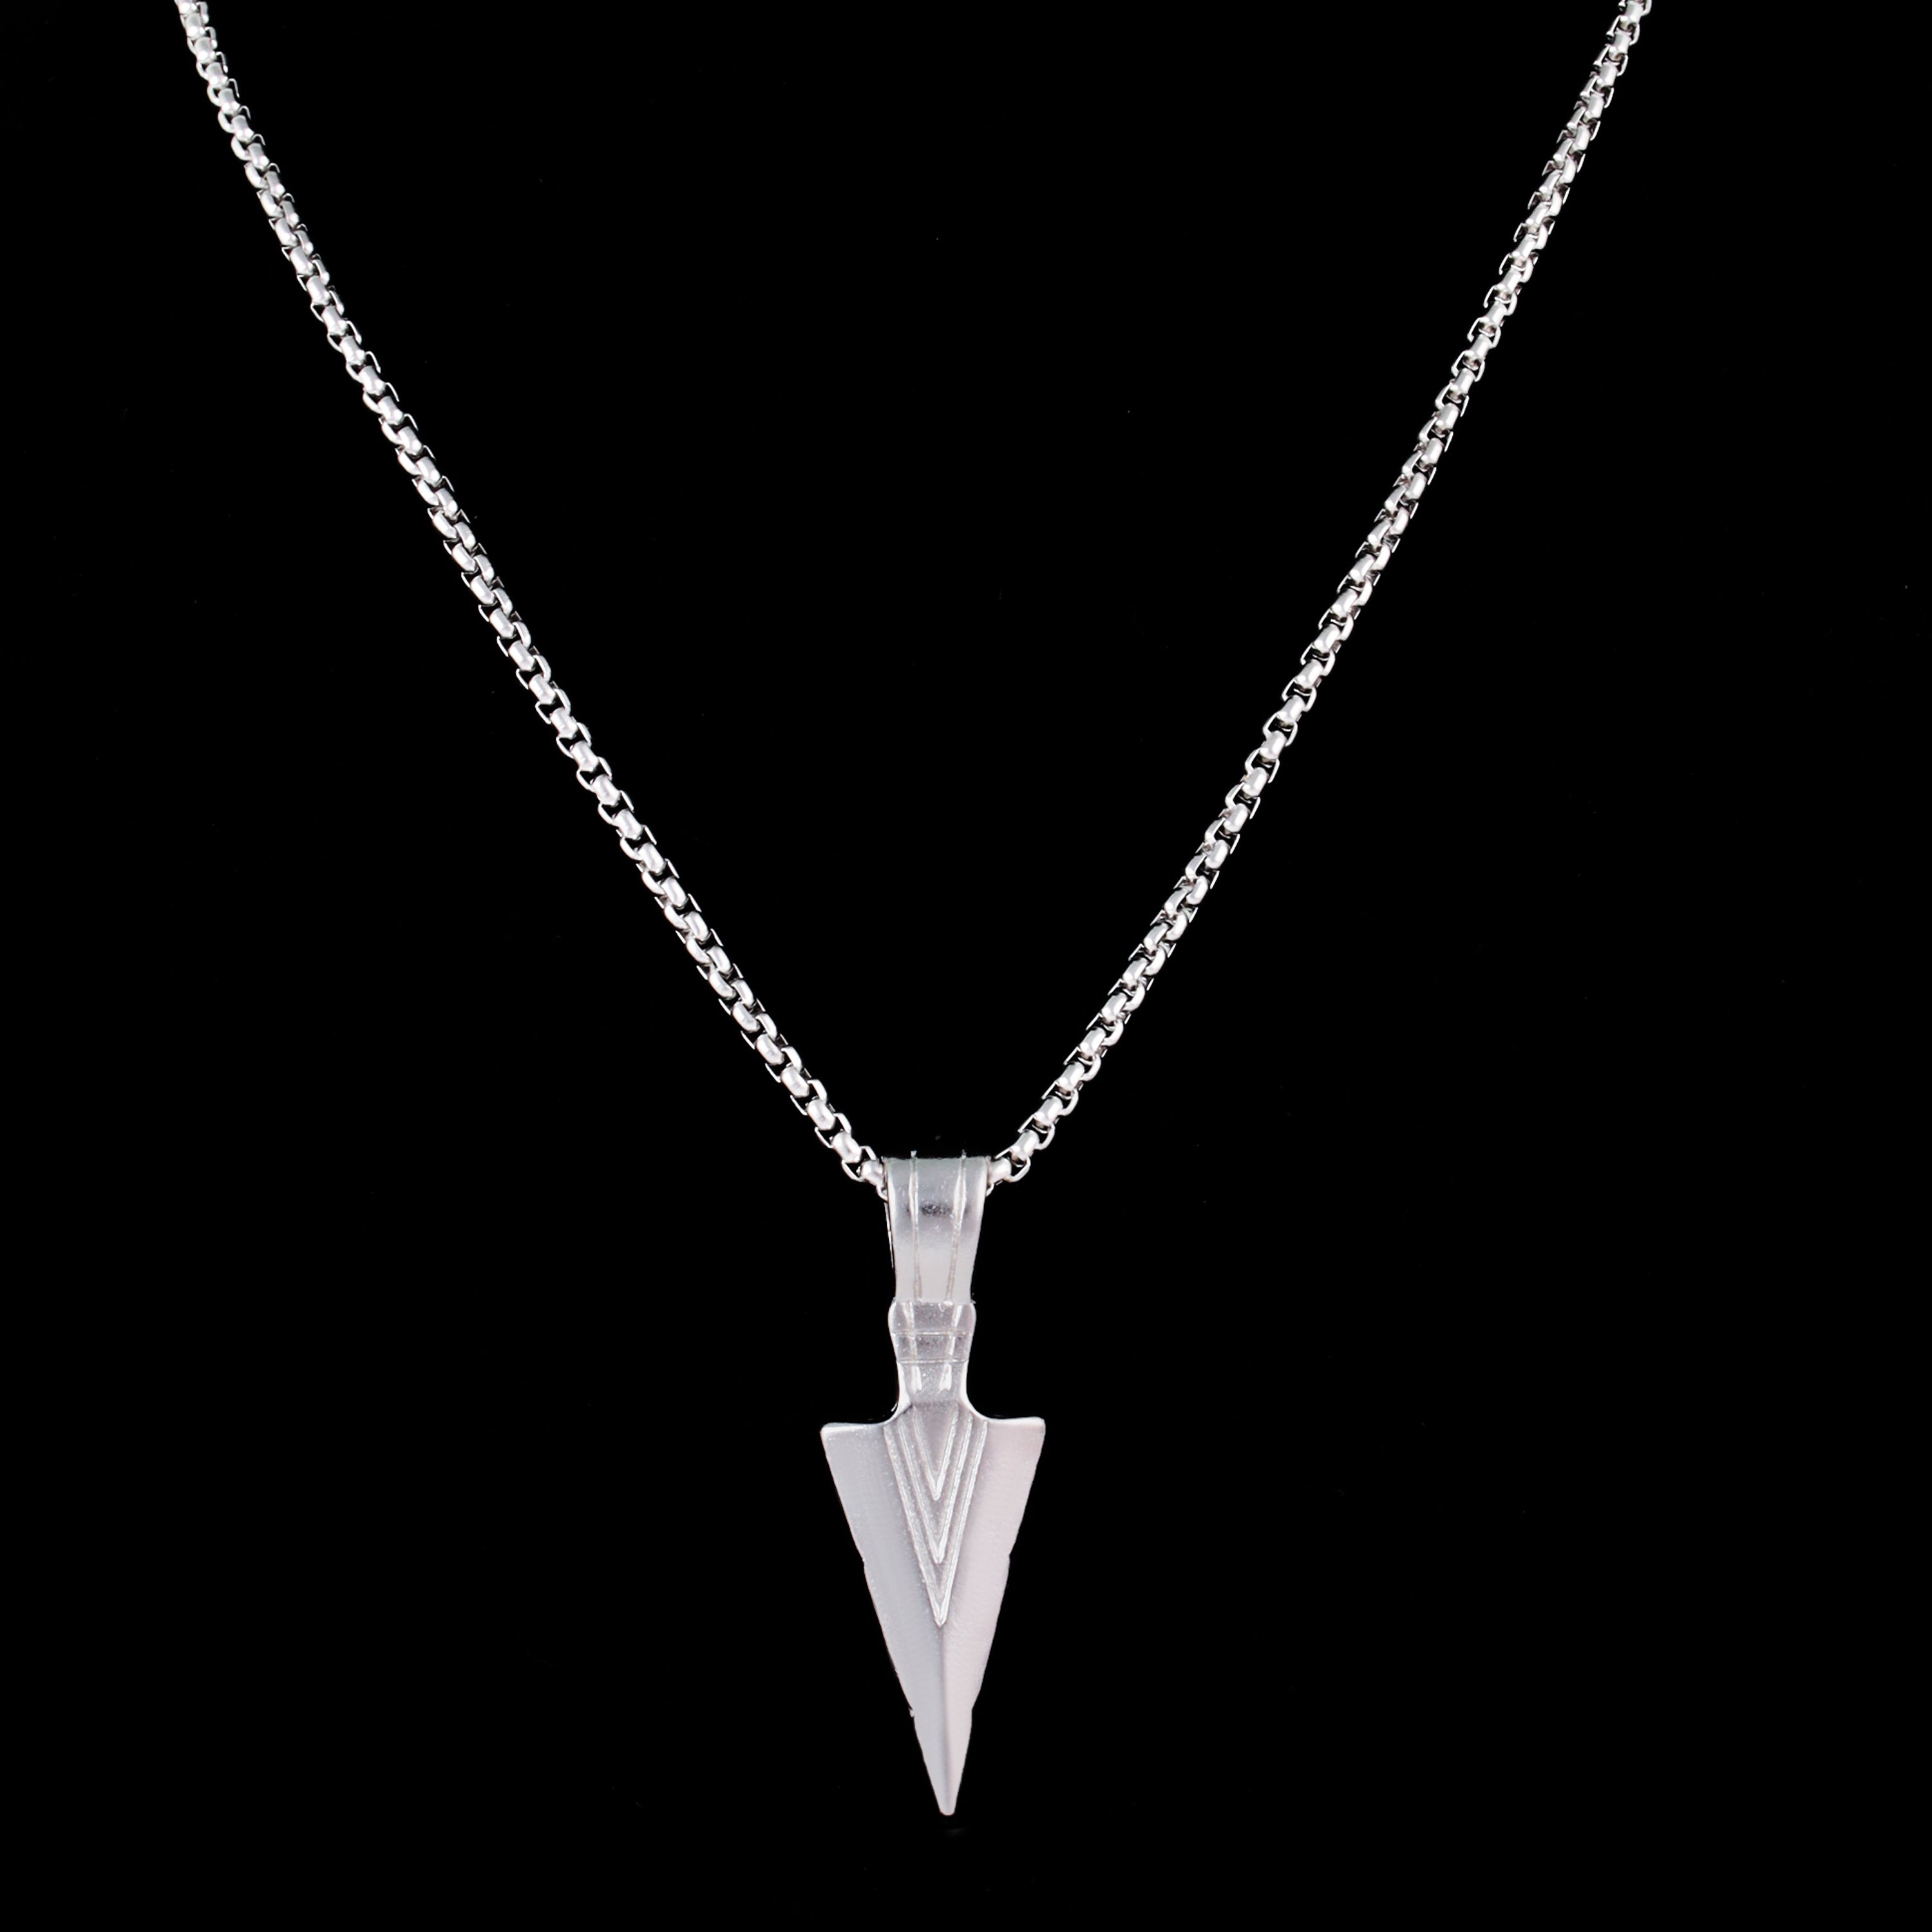 New Point Silver Pendant